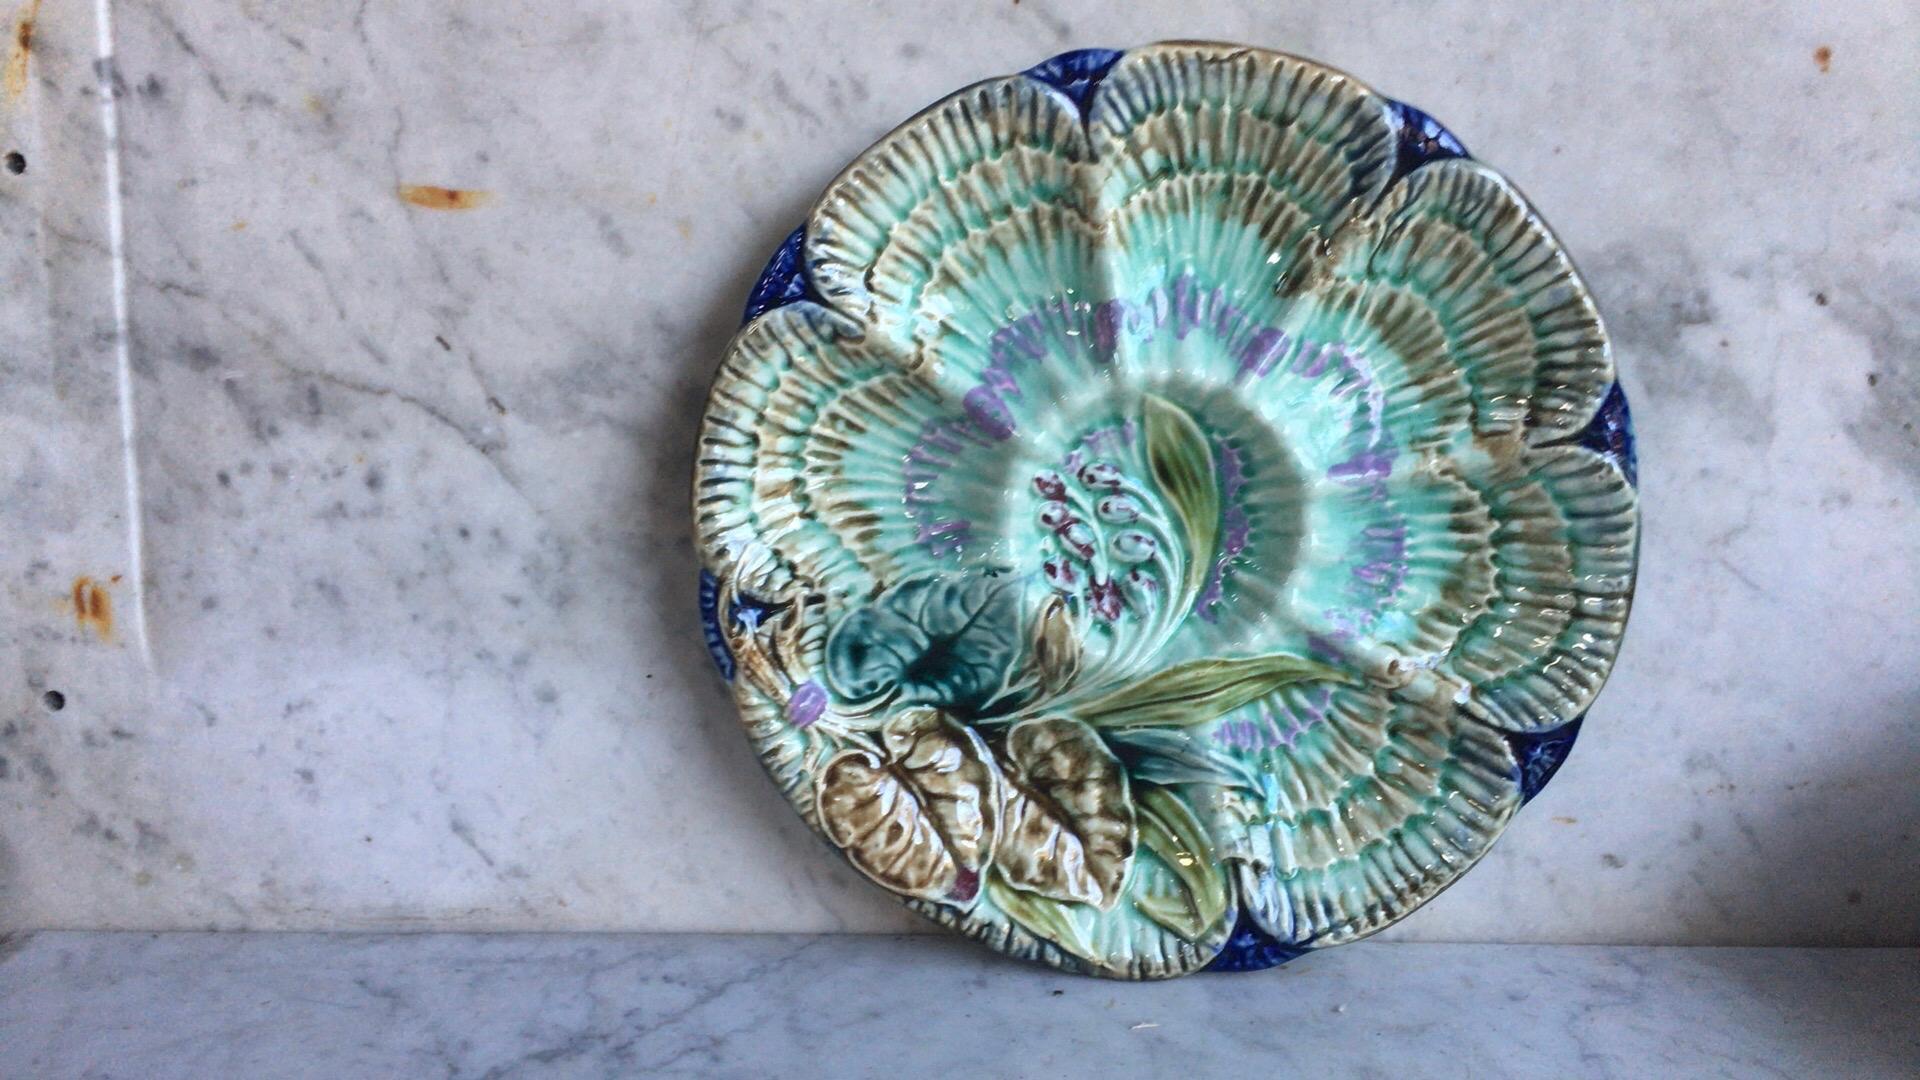 Rare 19th century Majolica blue oyster plate Wasmuel (Belgium) decorated with flowers.